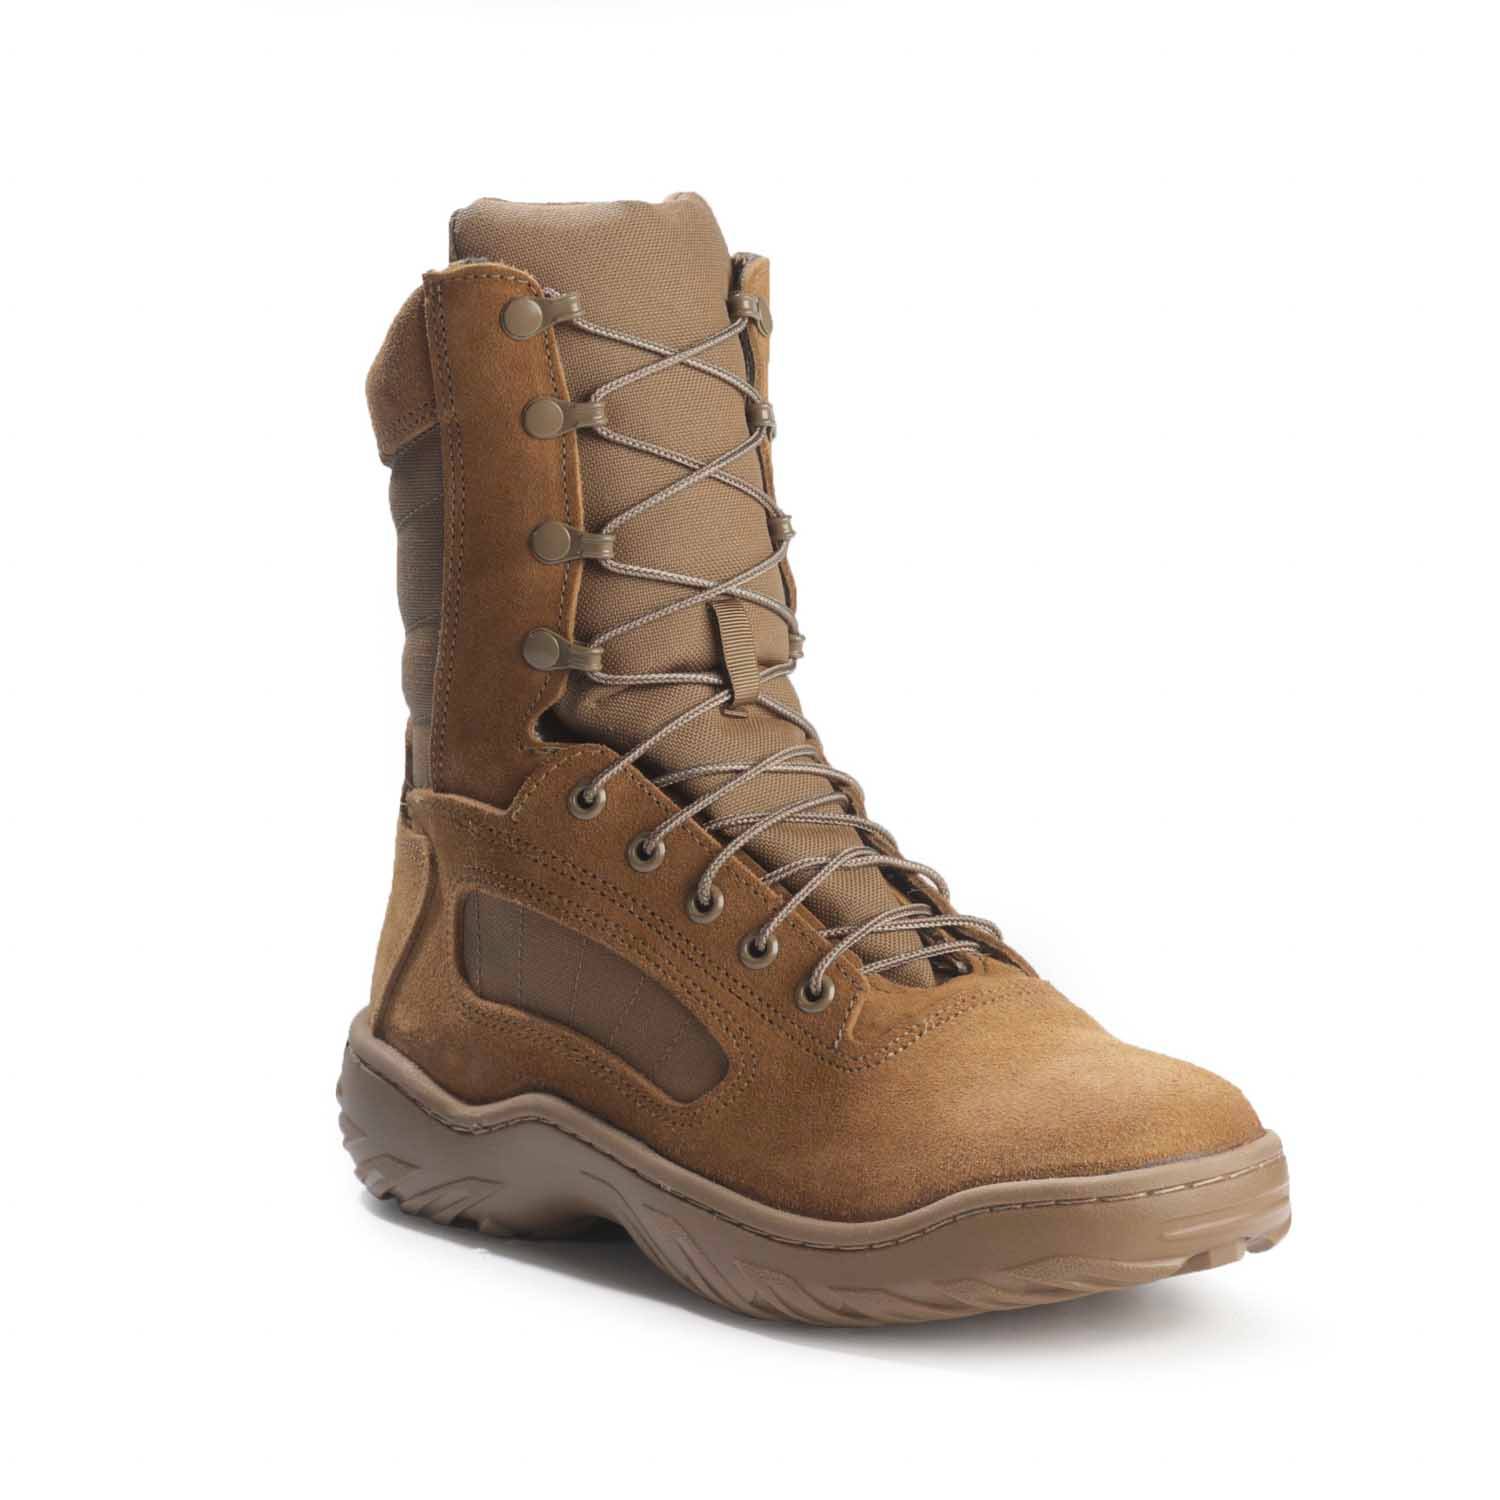 Reebok Fusion Max 8" Tactical Boot (Coyote Brown)